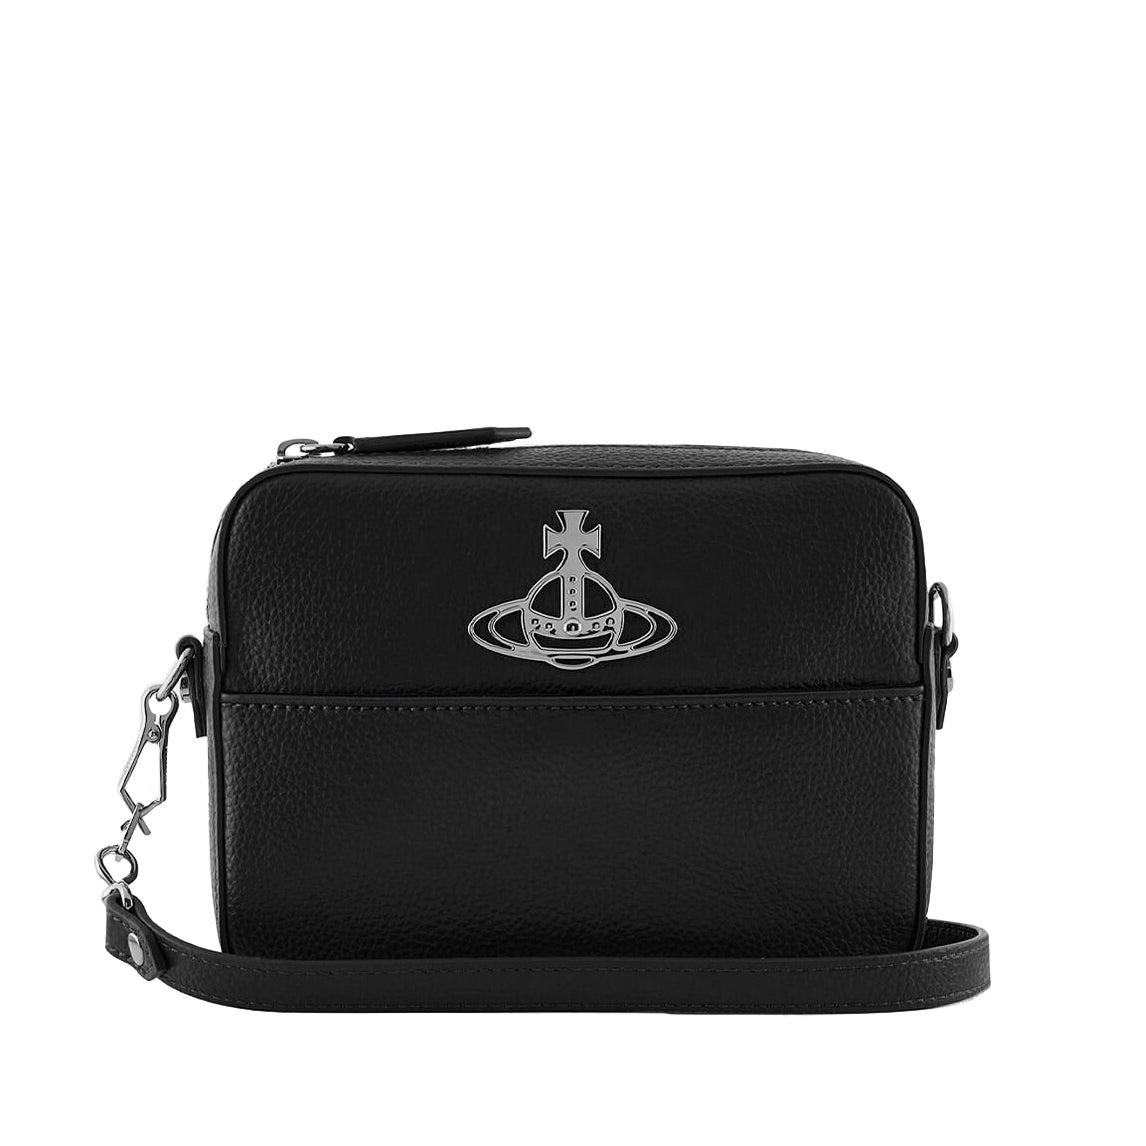 Vivienne Westwood Penny Double Pouch Crossbody Bag in Black